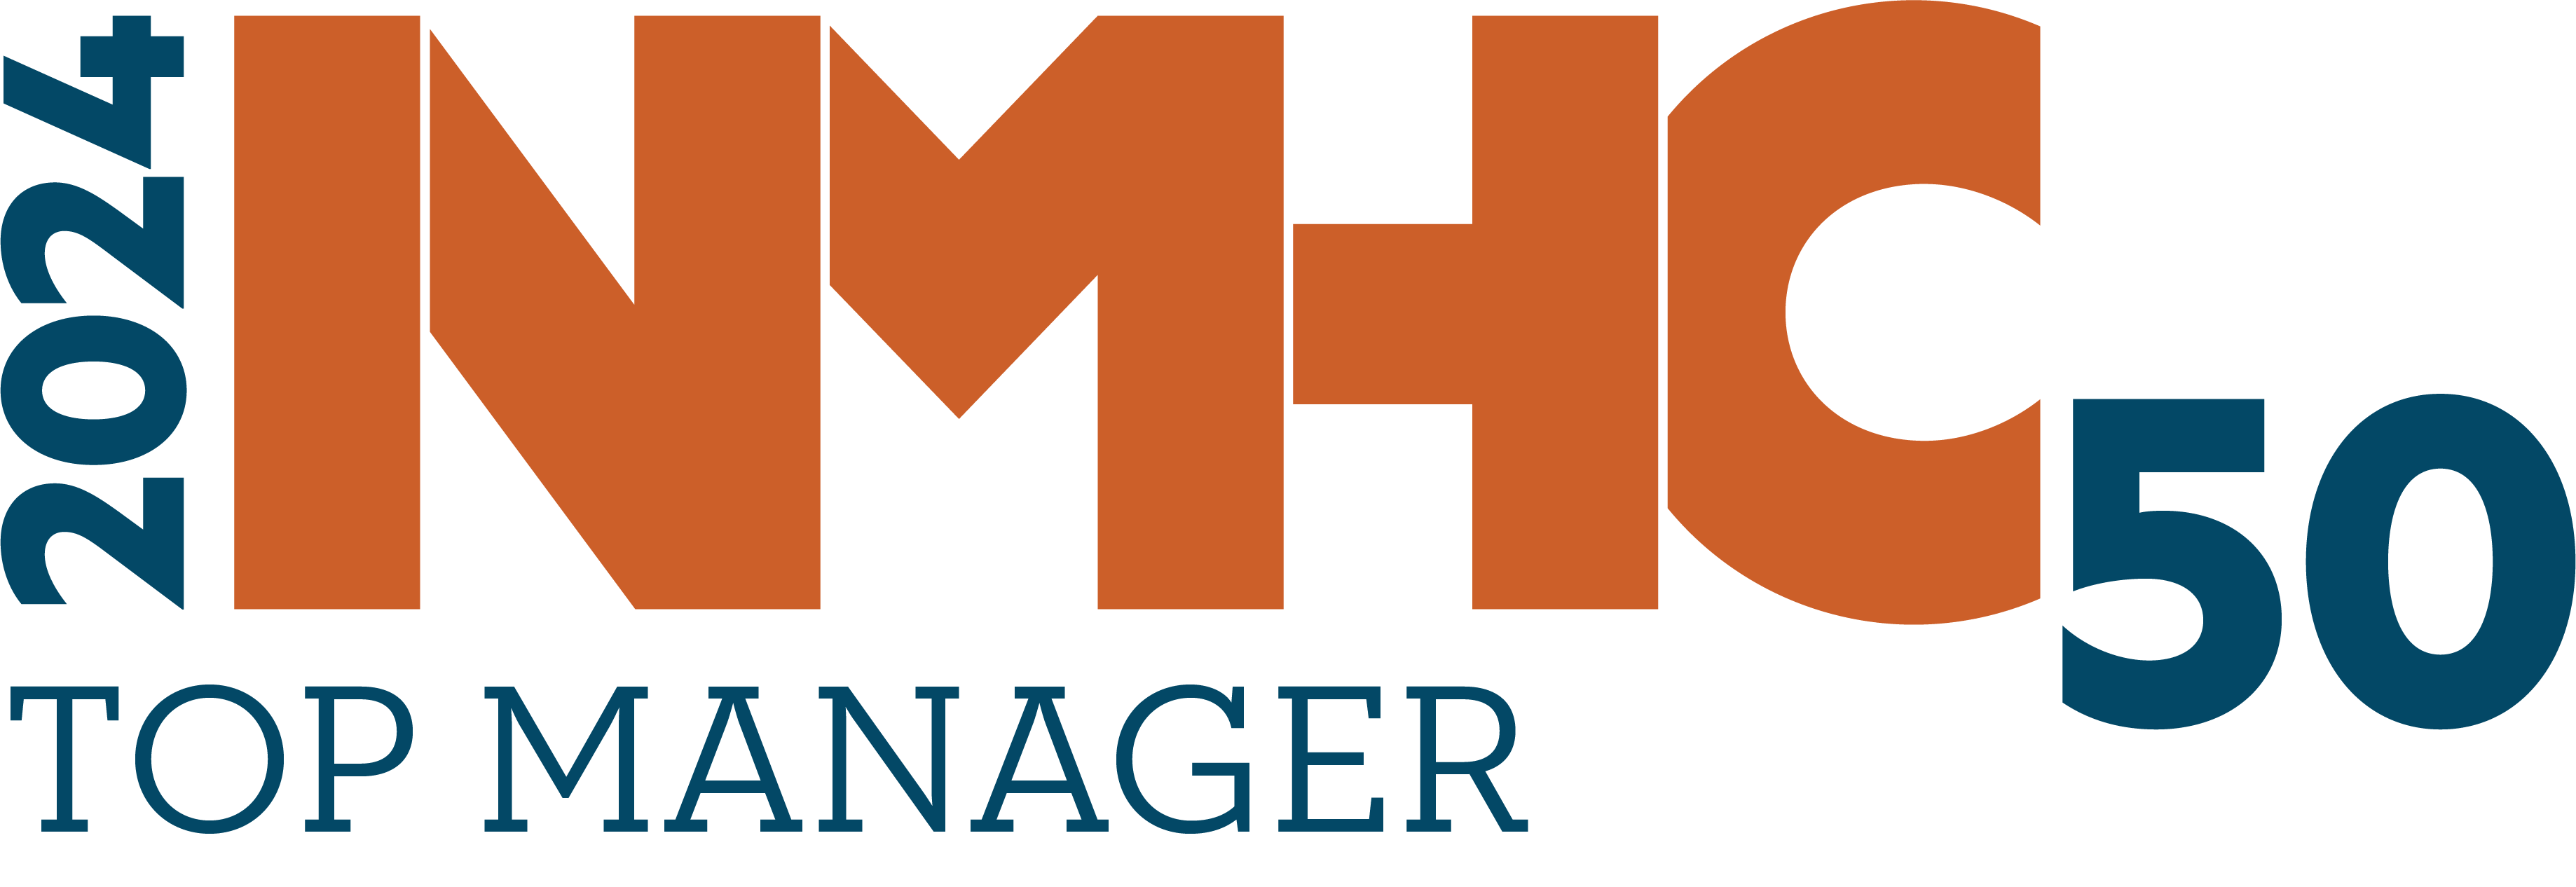 top manager logo - About Us